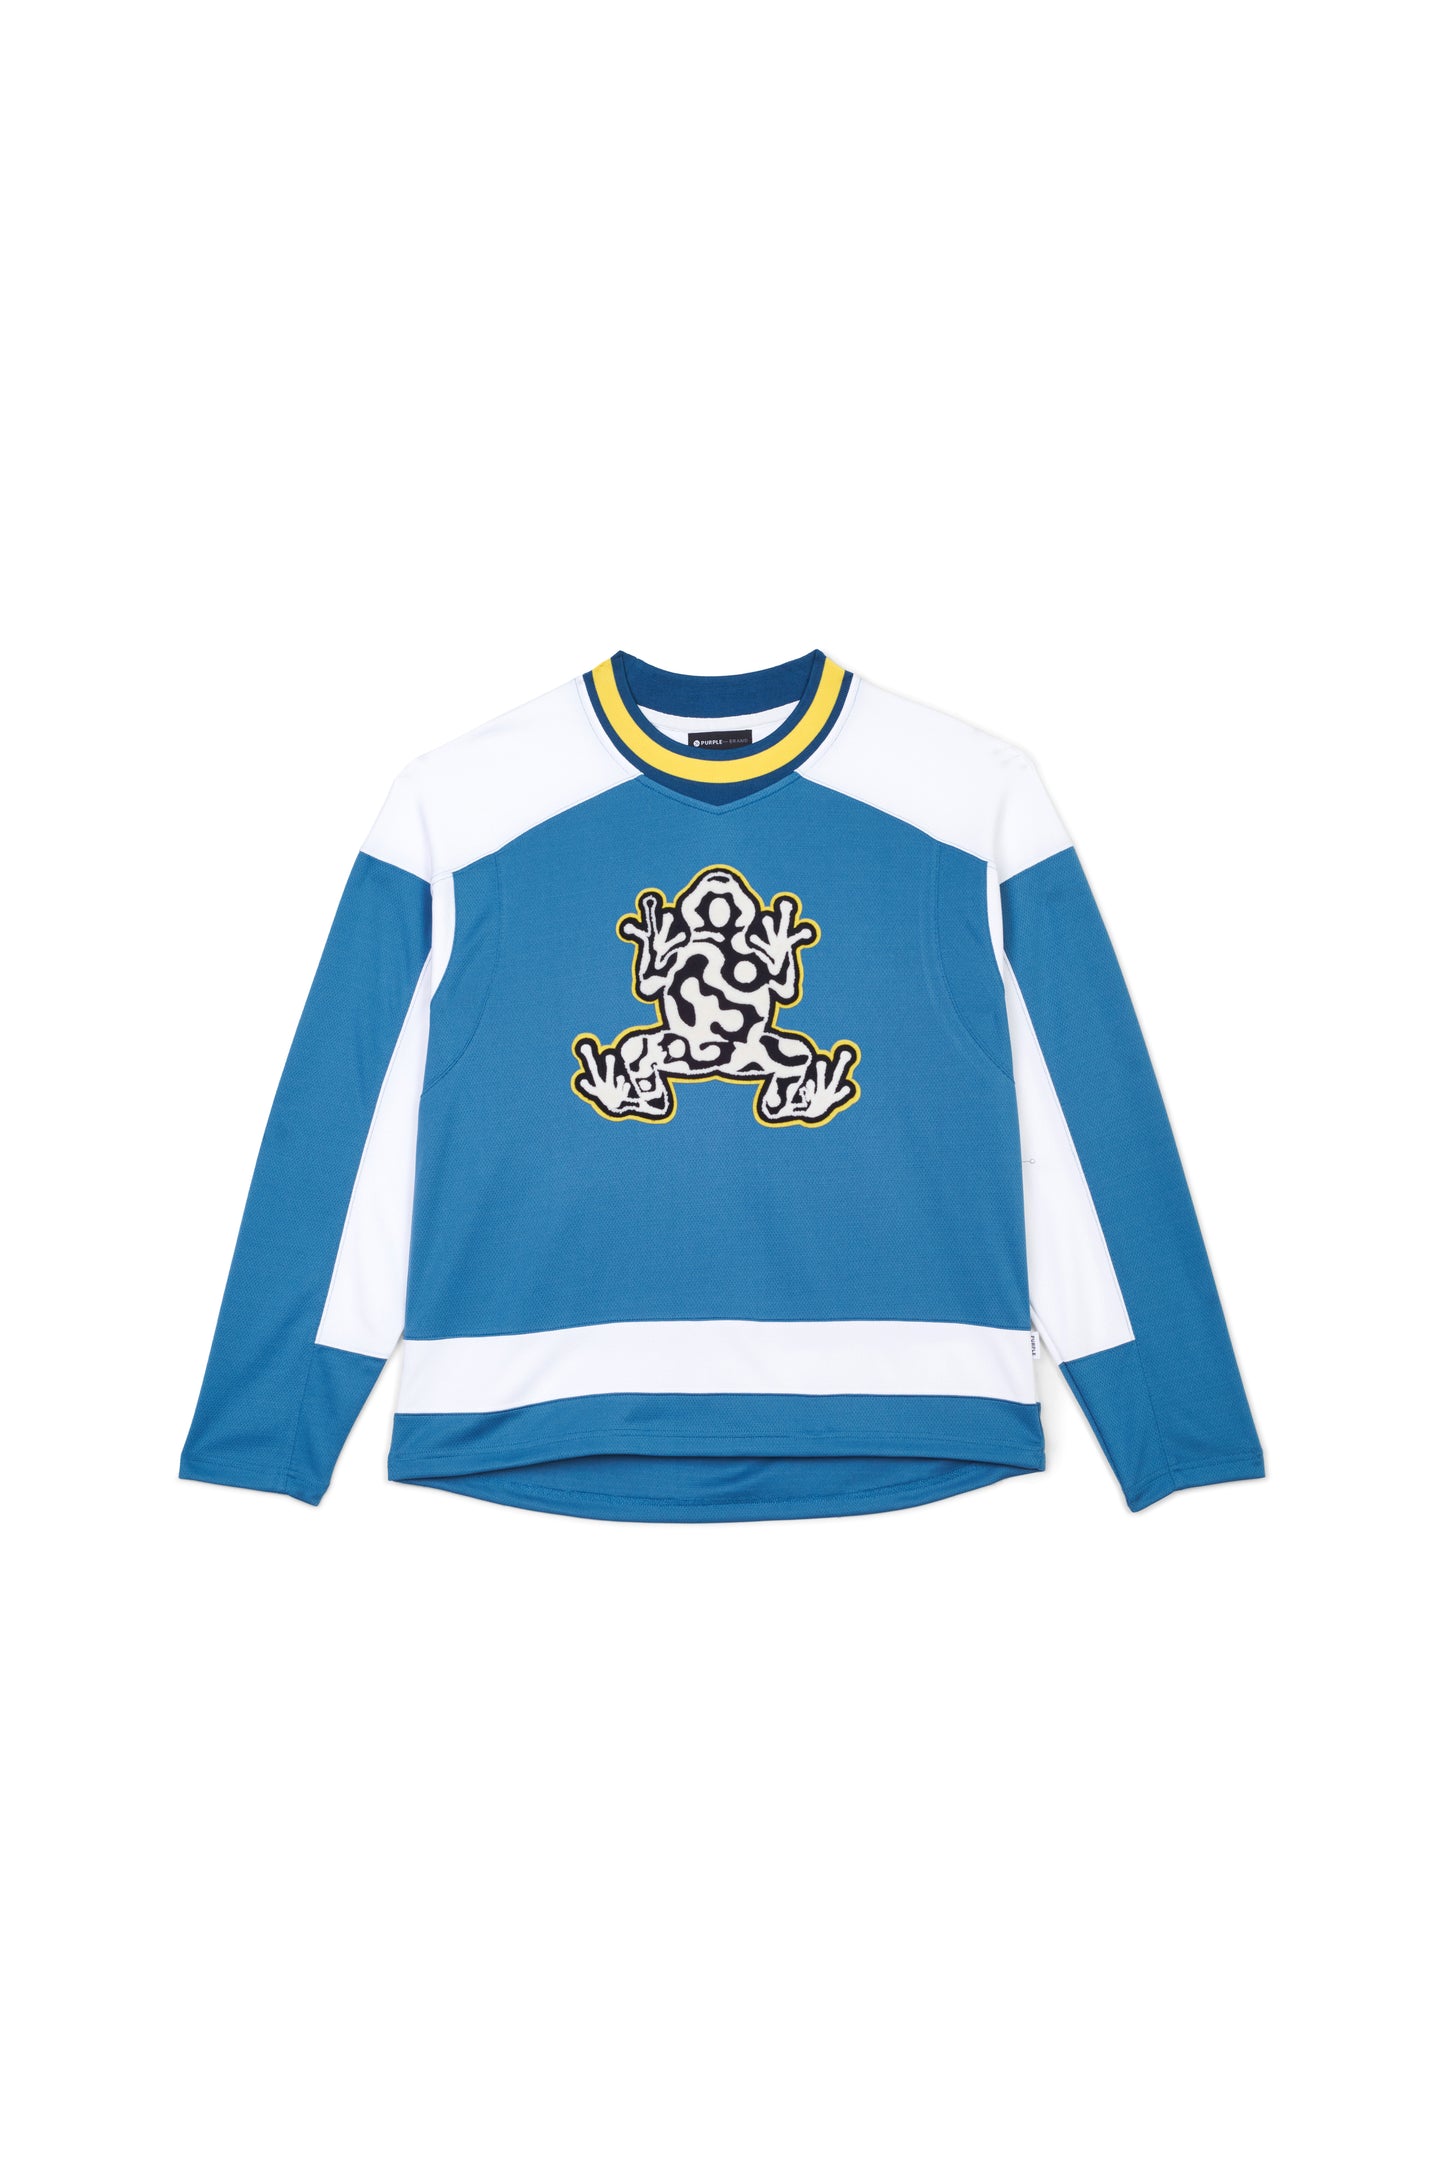 P206 ATHLETIC JERSEY - White and Real Teal